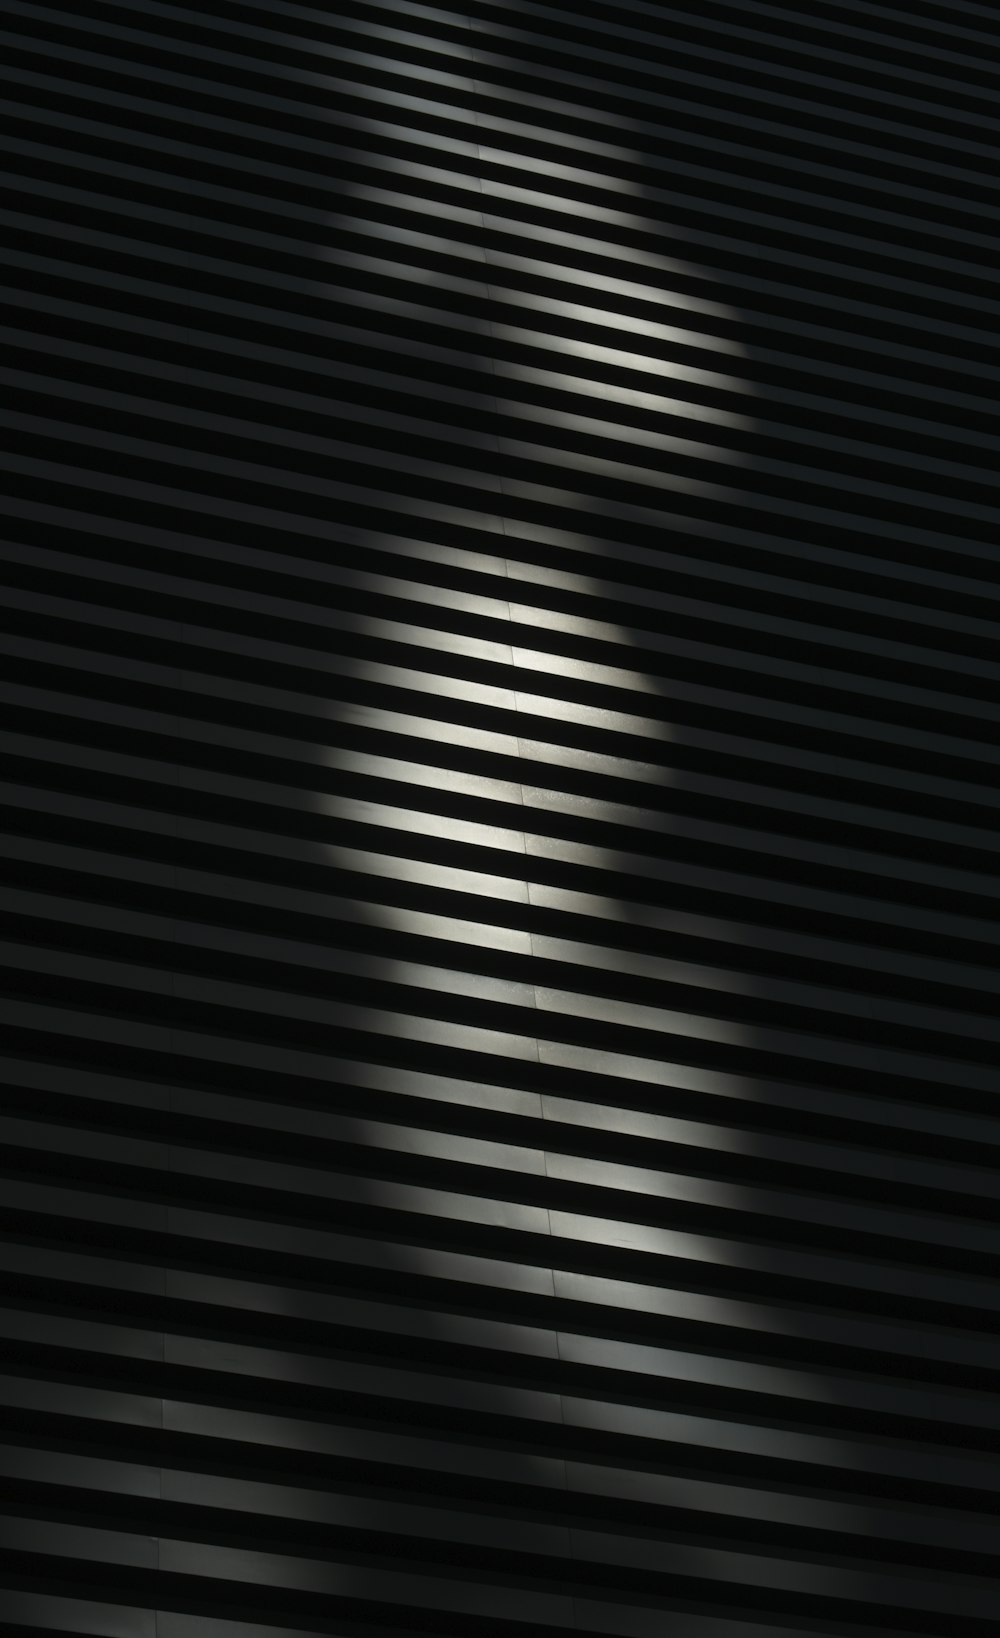 a close up of a black and white striped surface